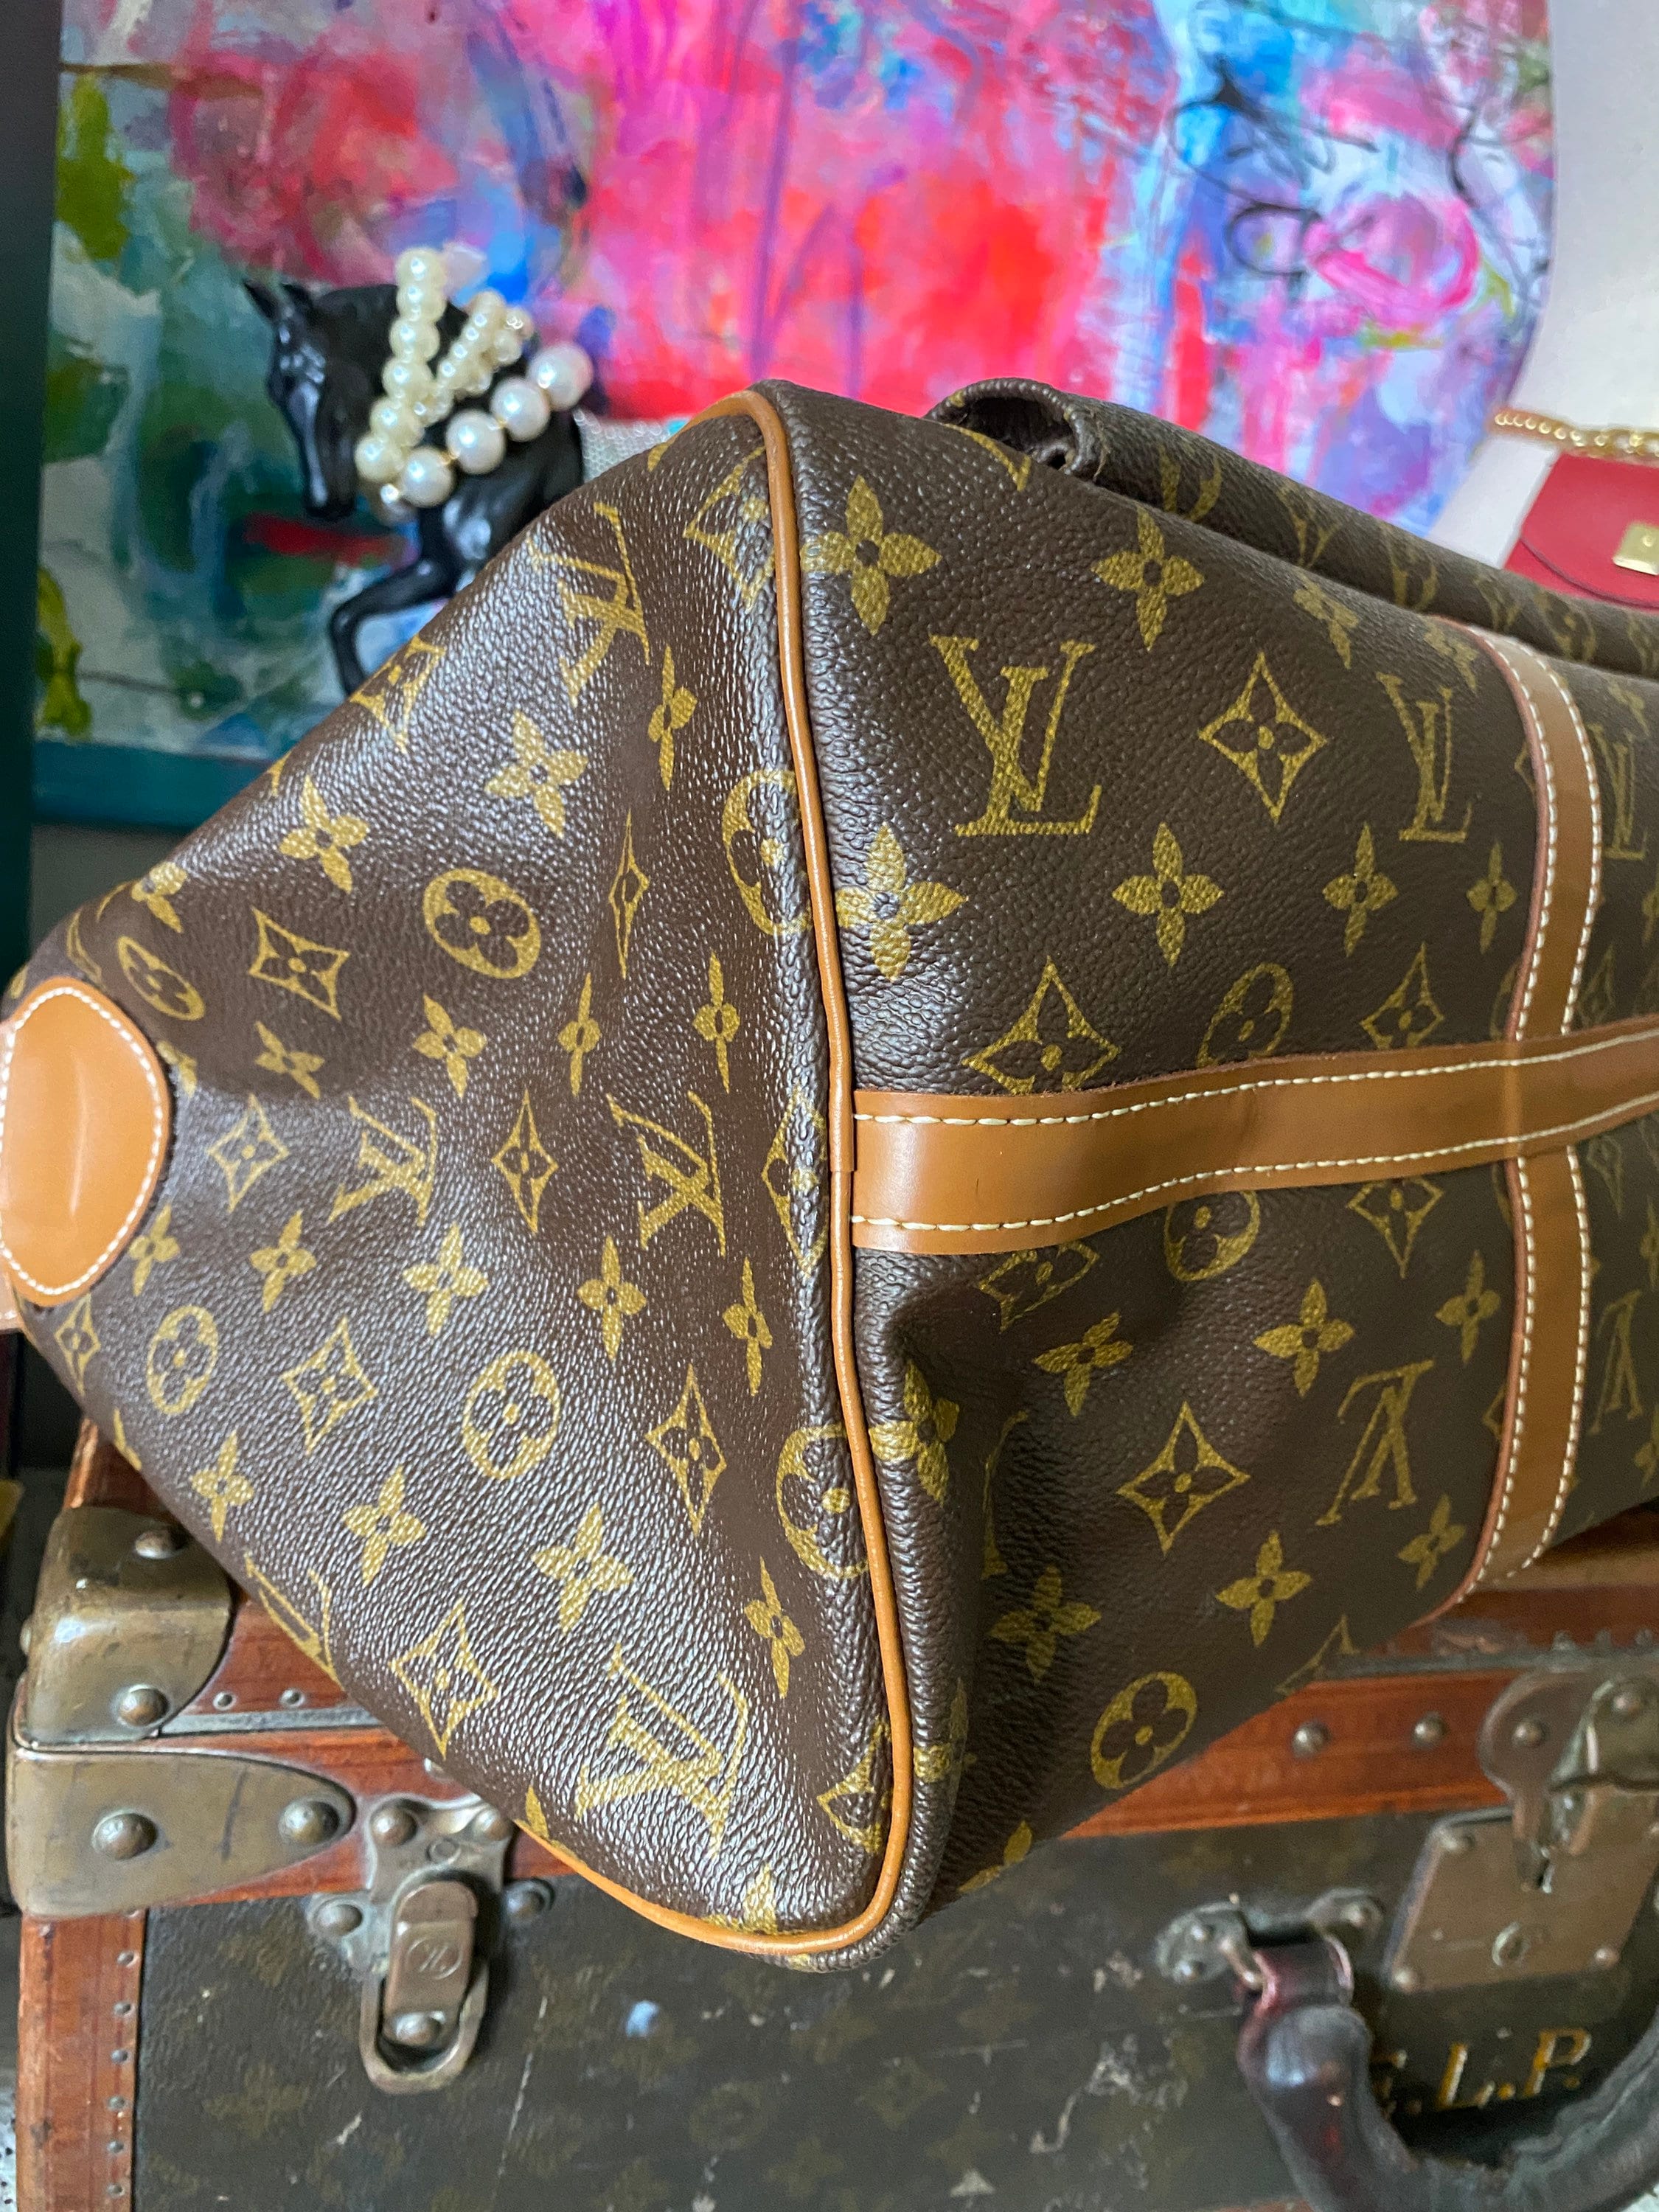 SALE Ultra Rare and Vintage LOUIS VUITTON Keepall Duffle -  Norway